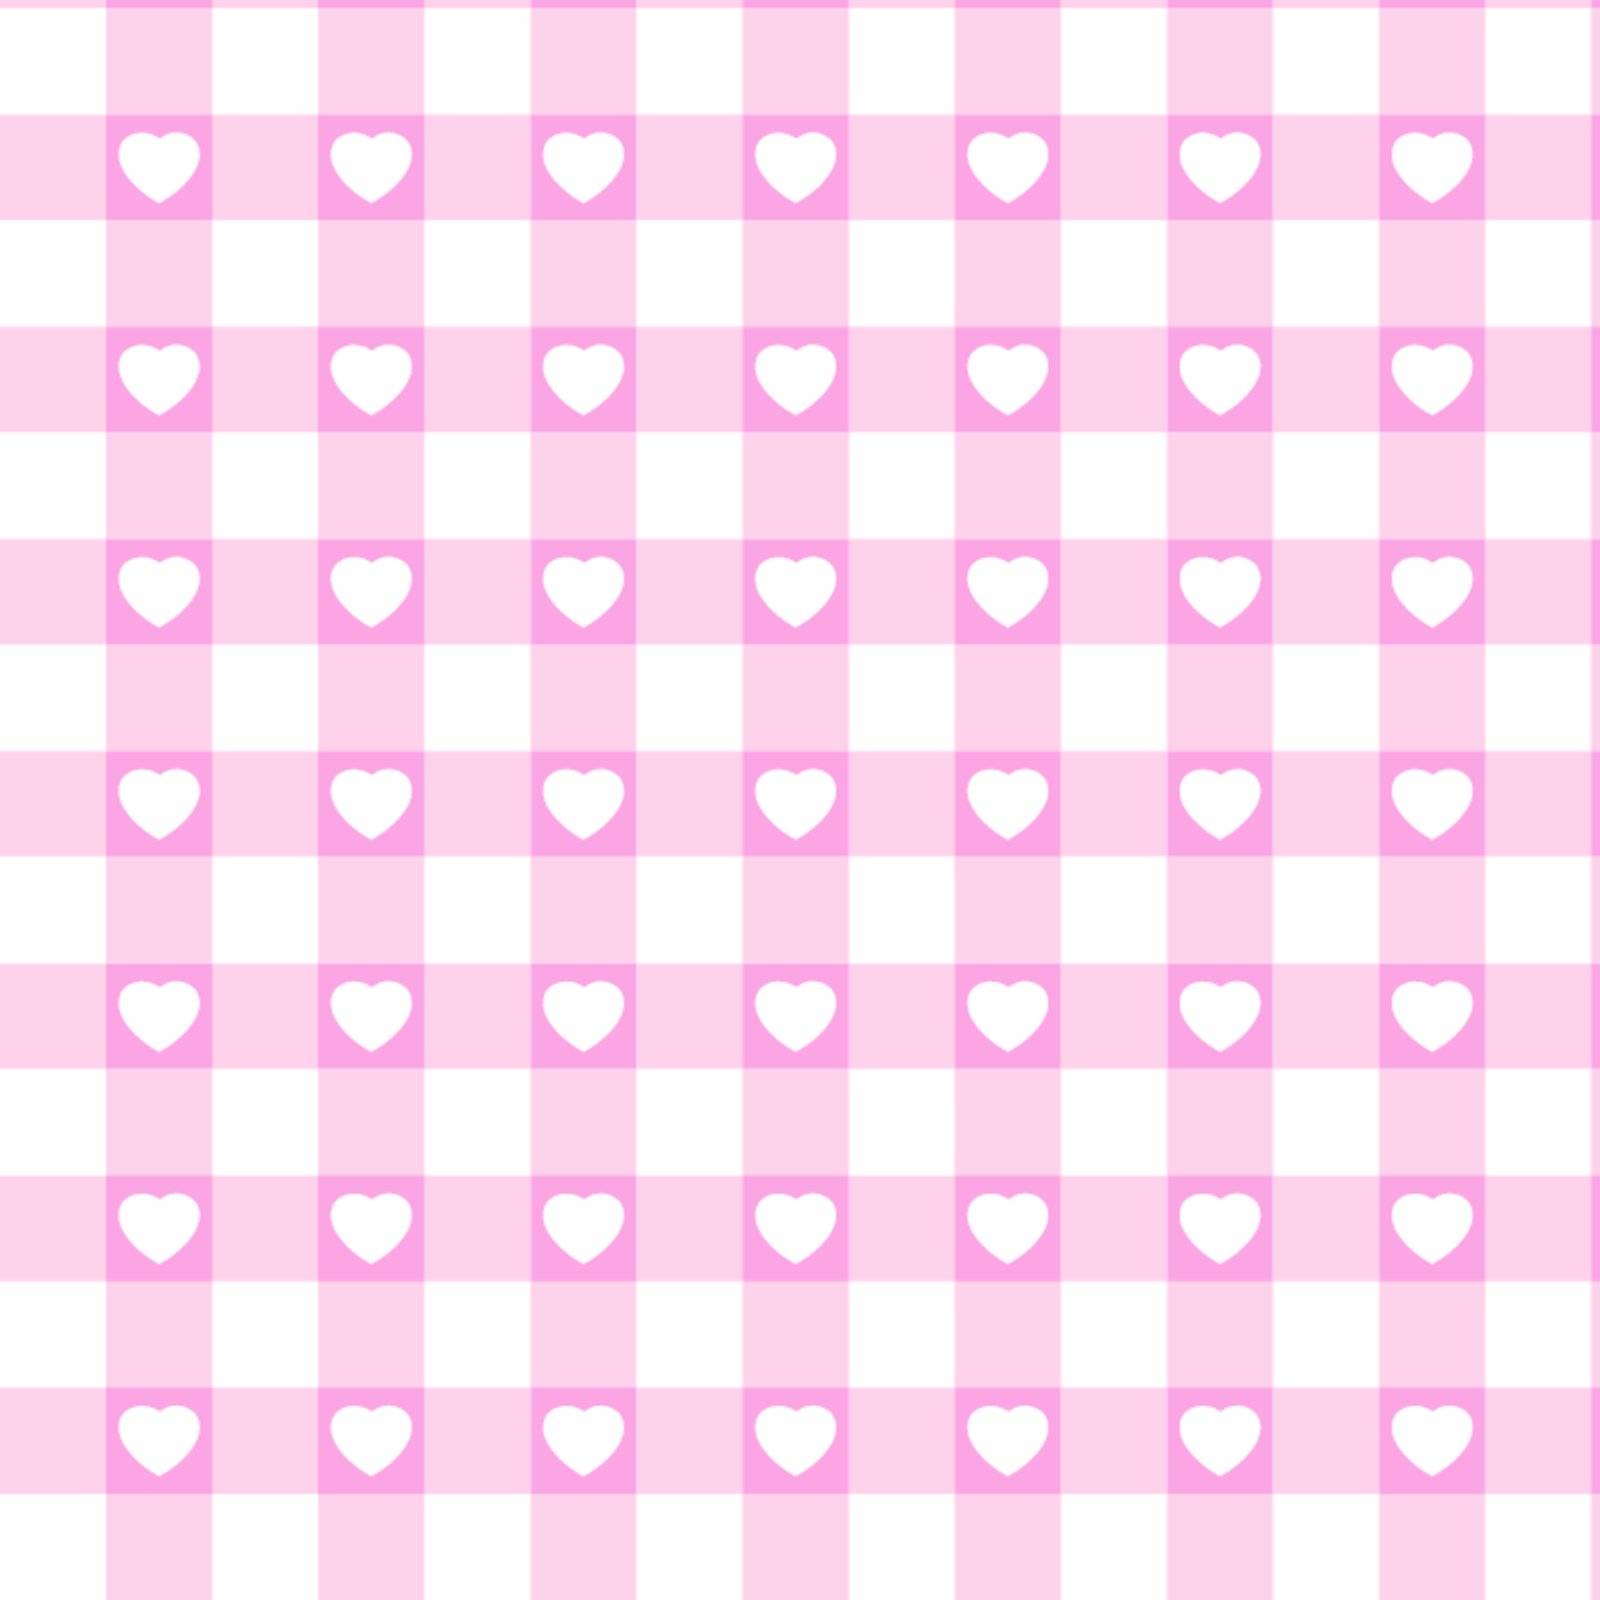 Swatch ready seamless Hearts & Gingham. EPS 8 by Petrov_Vladimir